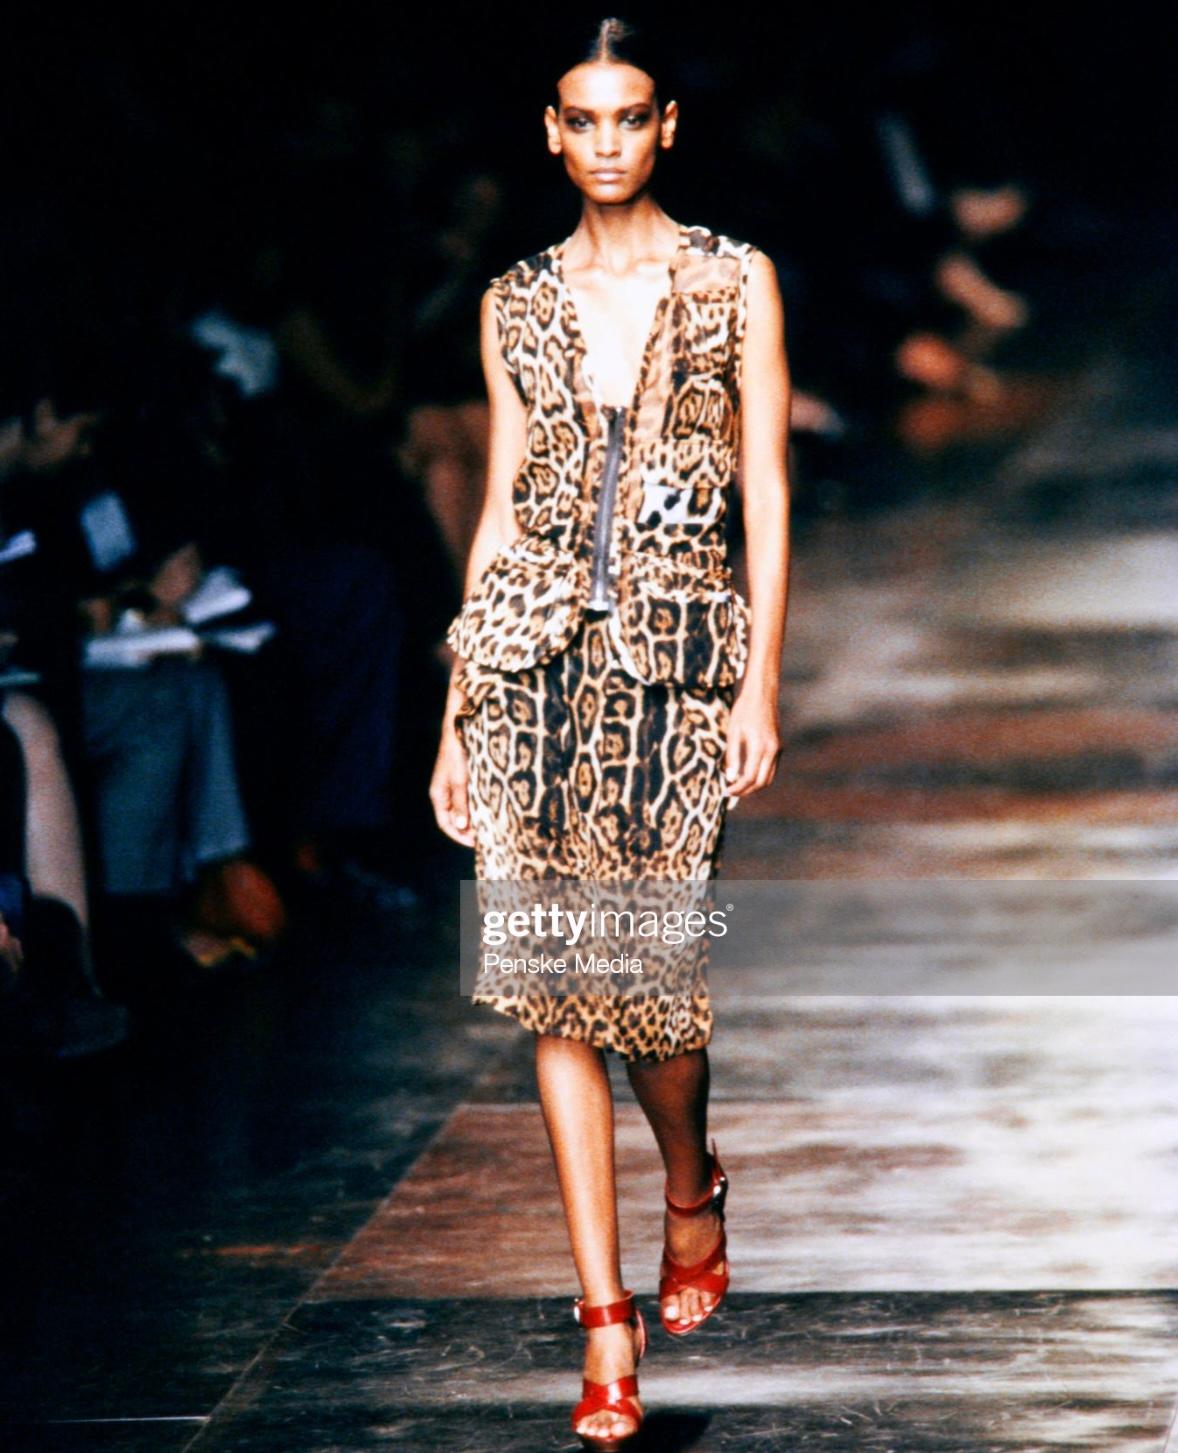 Presenting the opening look from the Spring/Summer 2002 Yves Saint Laurent Rive Gauche runway collection designed by Tom Ford and worn by Liya Kebede. Constructed of sheer cheetah printed silk with the YSL monogram logo peppered throughout, this set